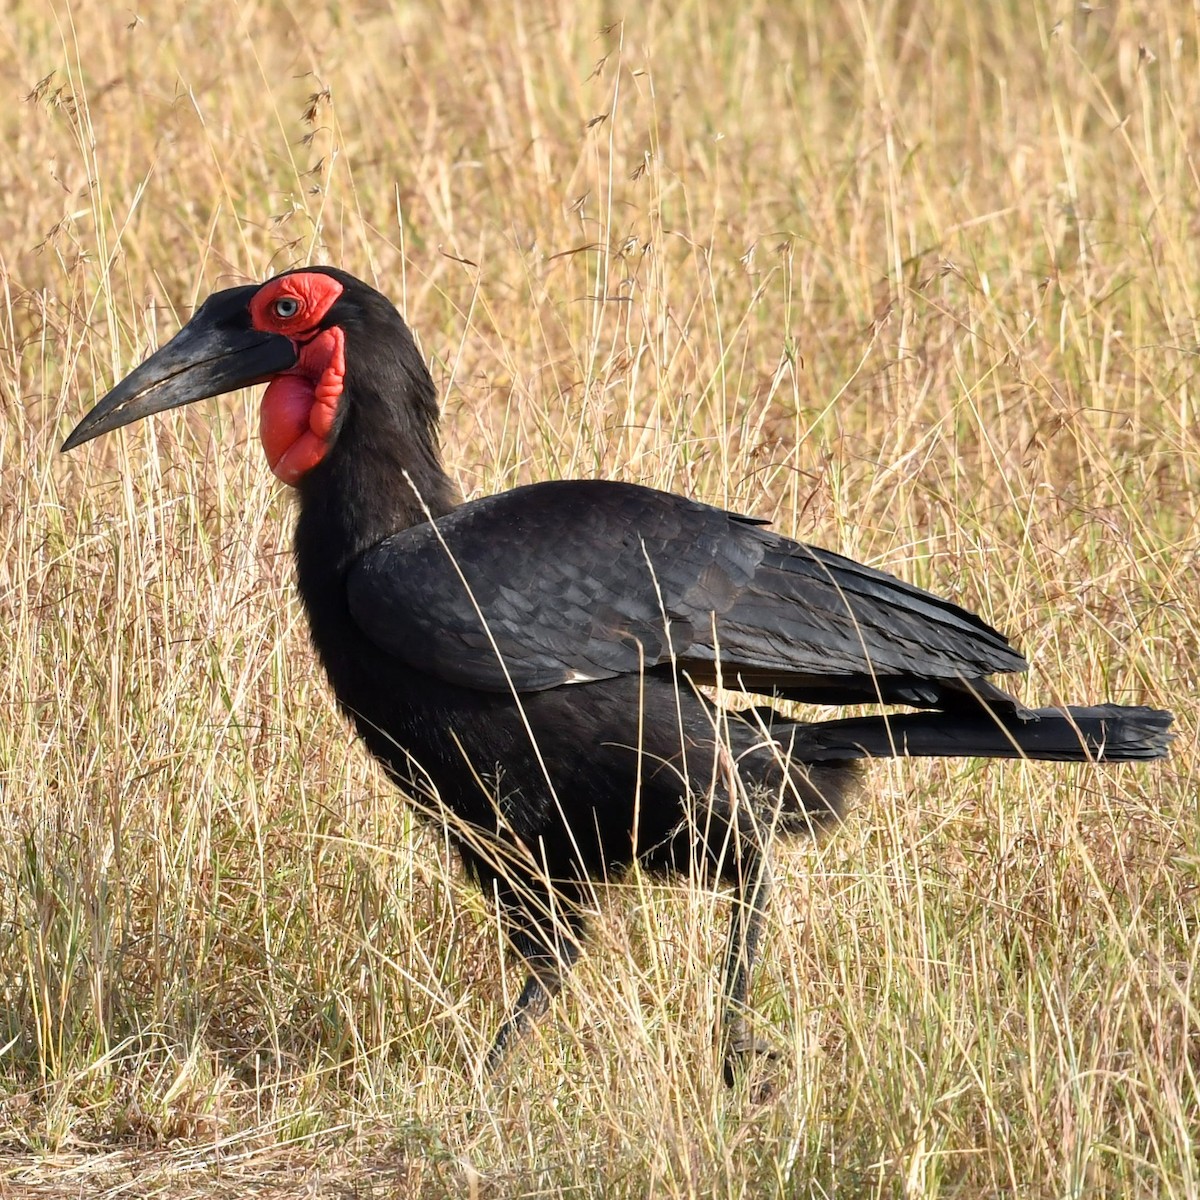 Southern Ground-Hornbill - Qin Huang